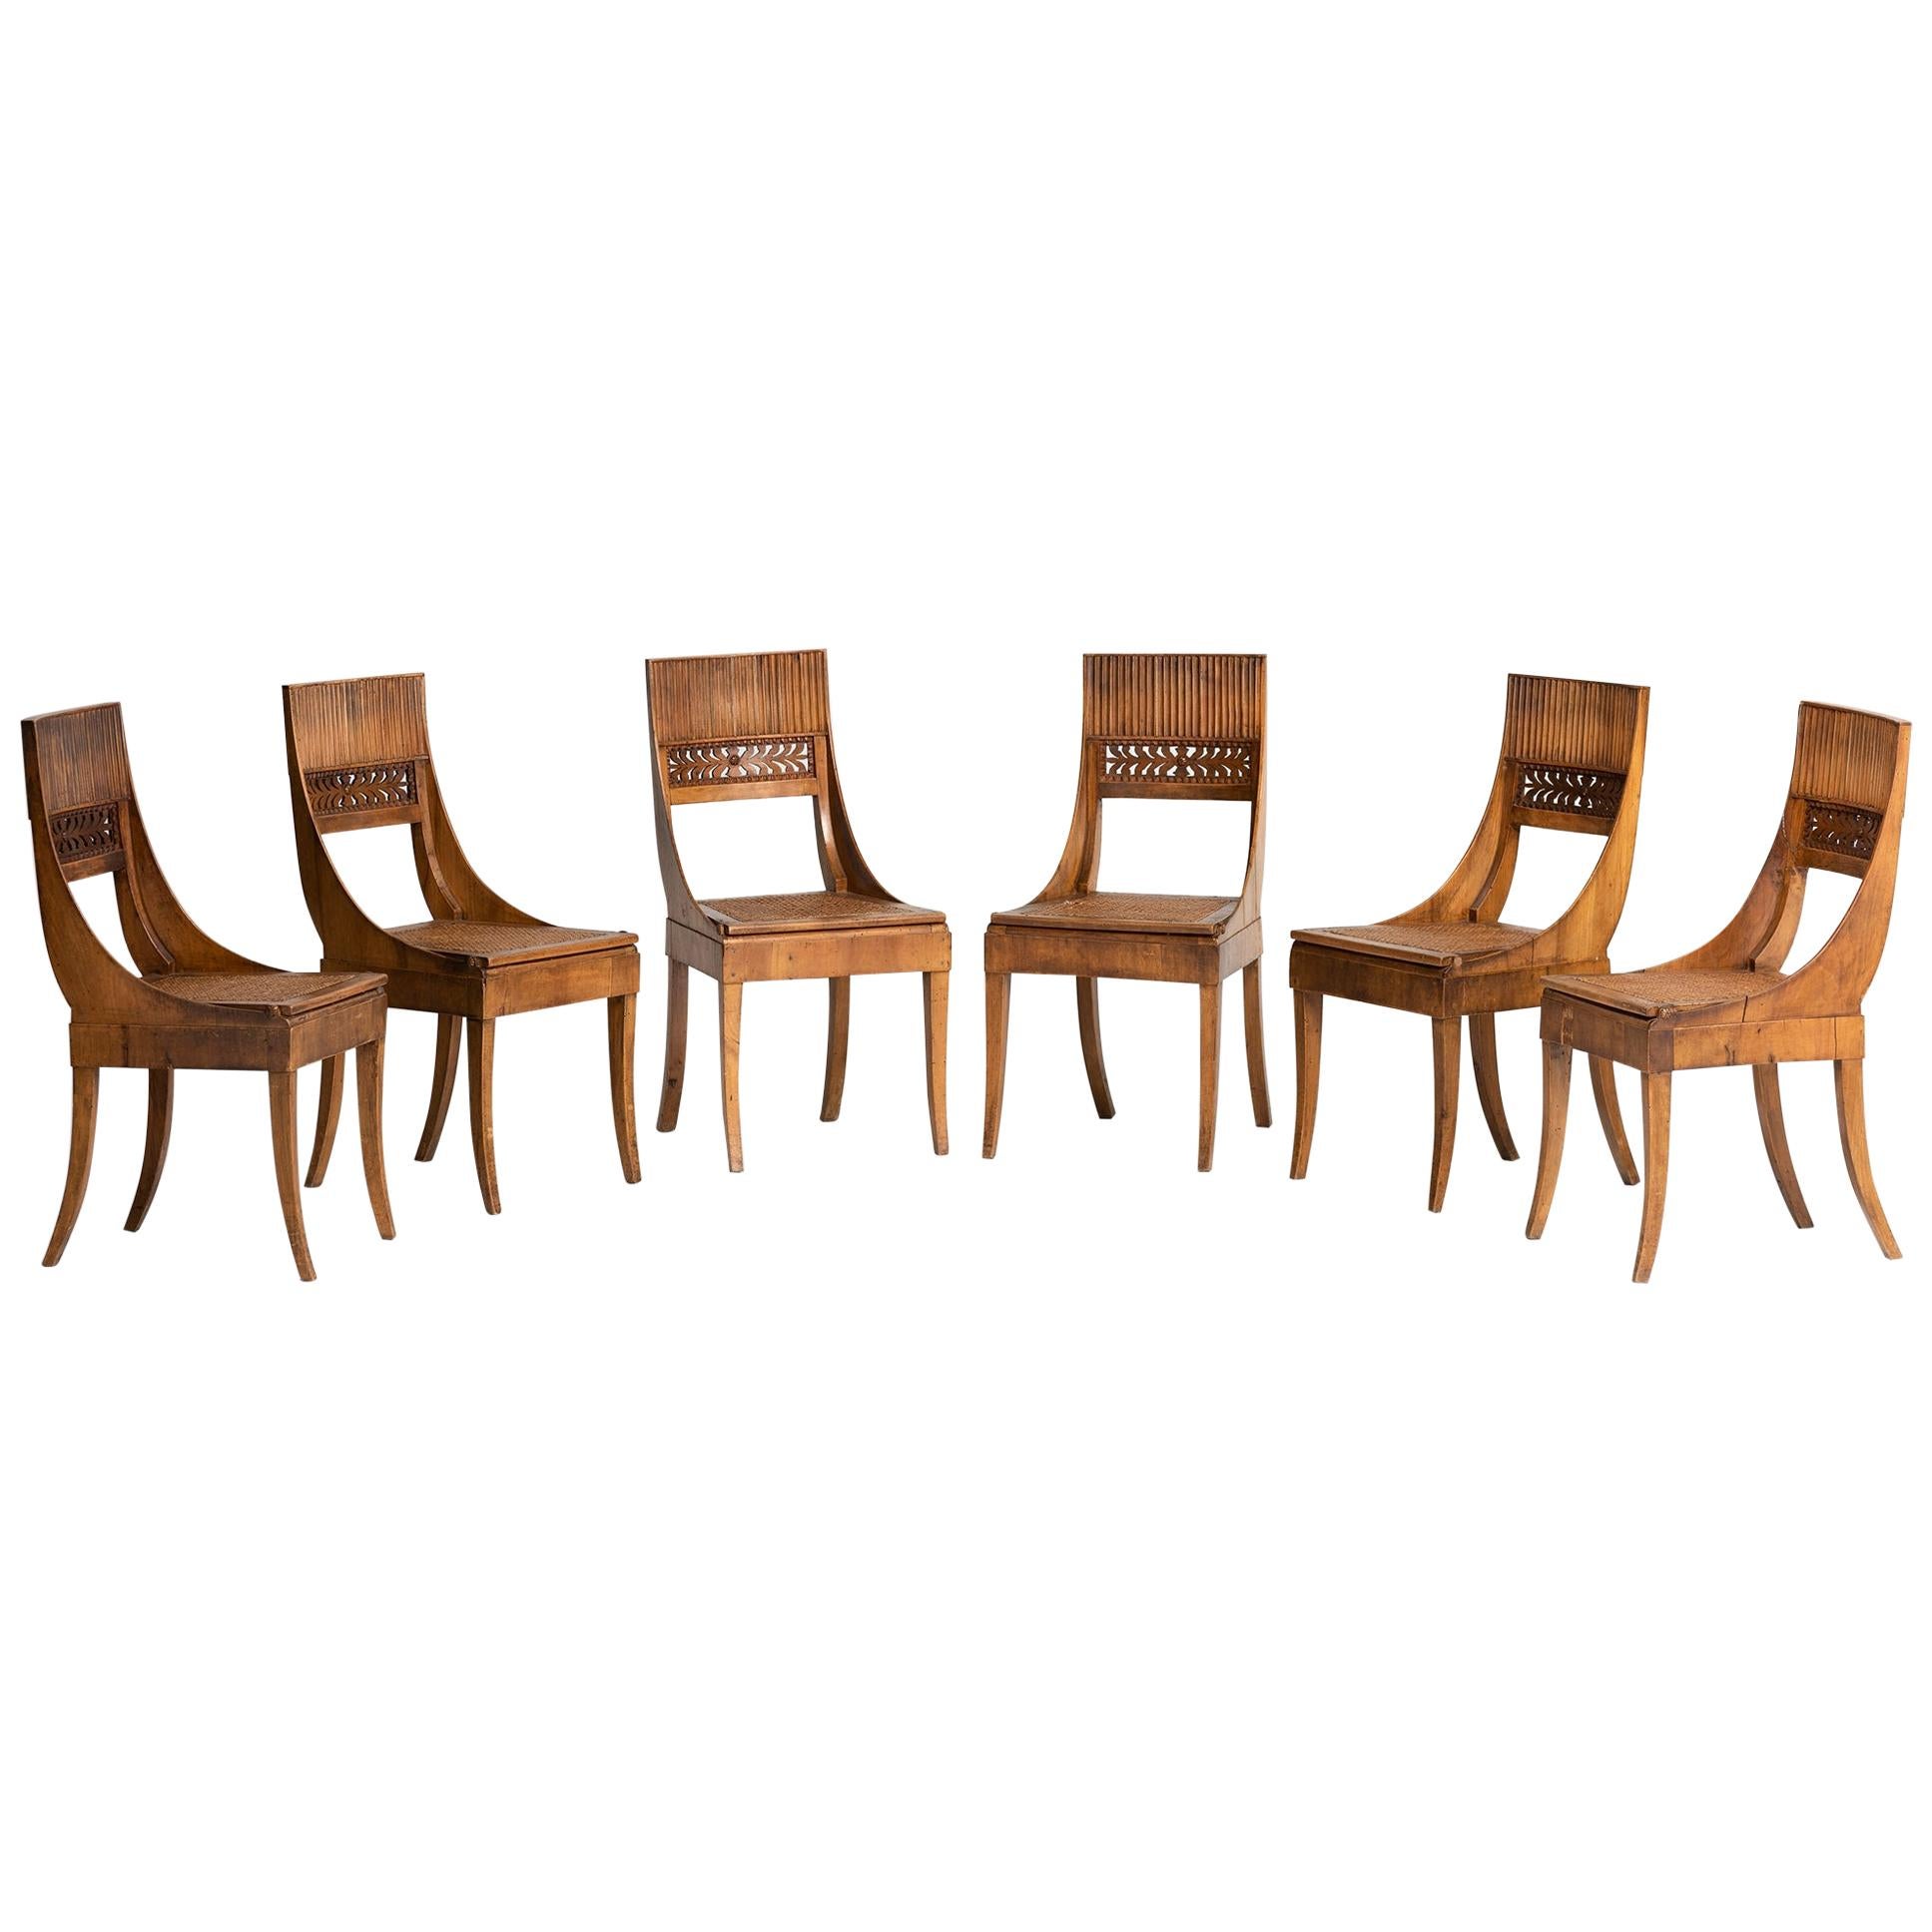 Set of '6' Empire Chairs